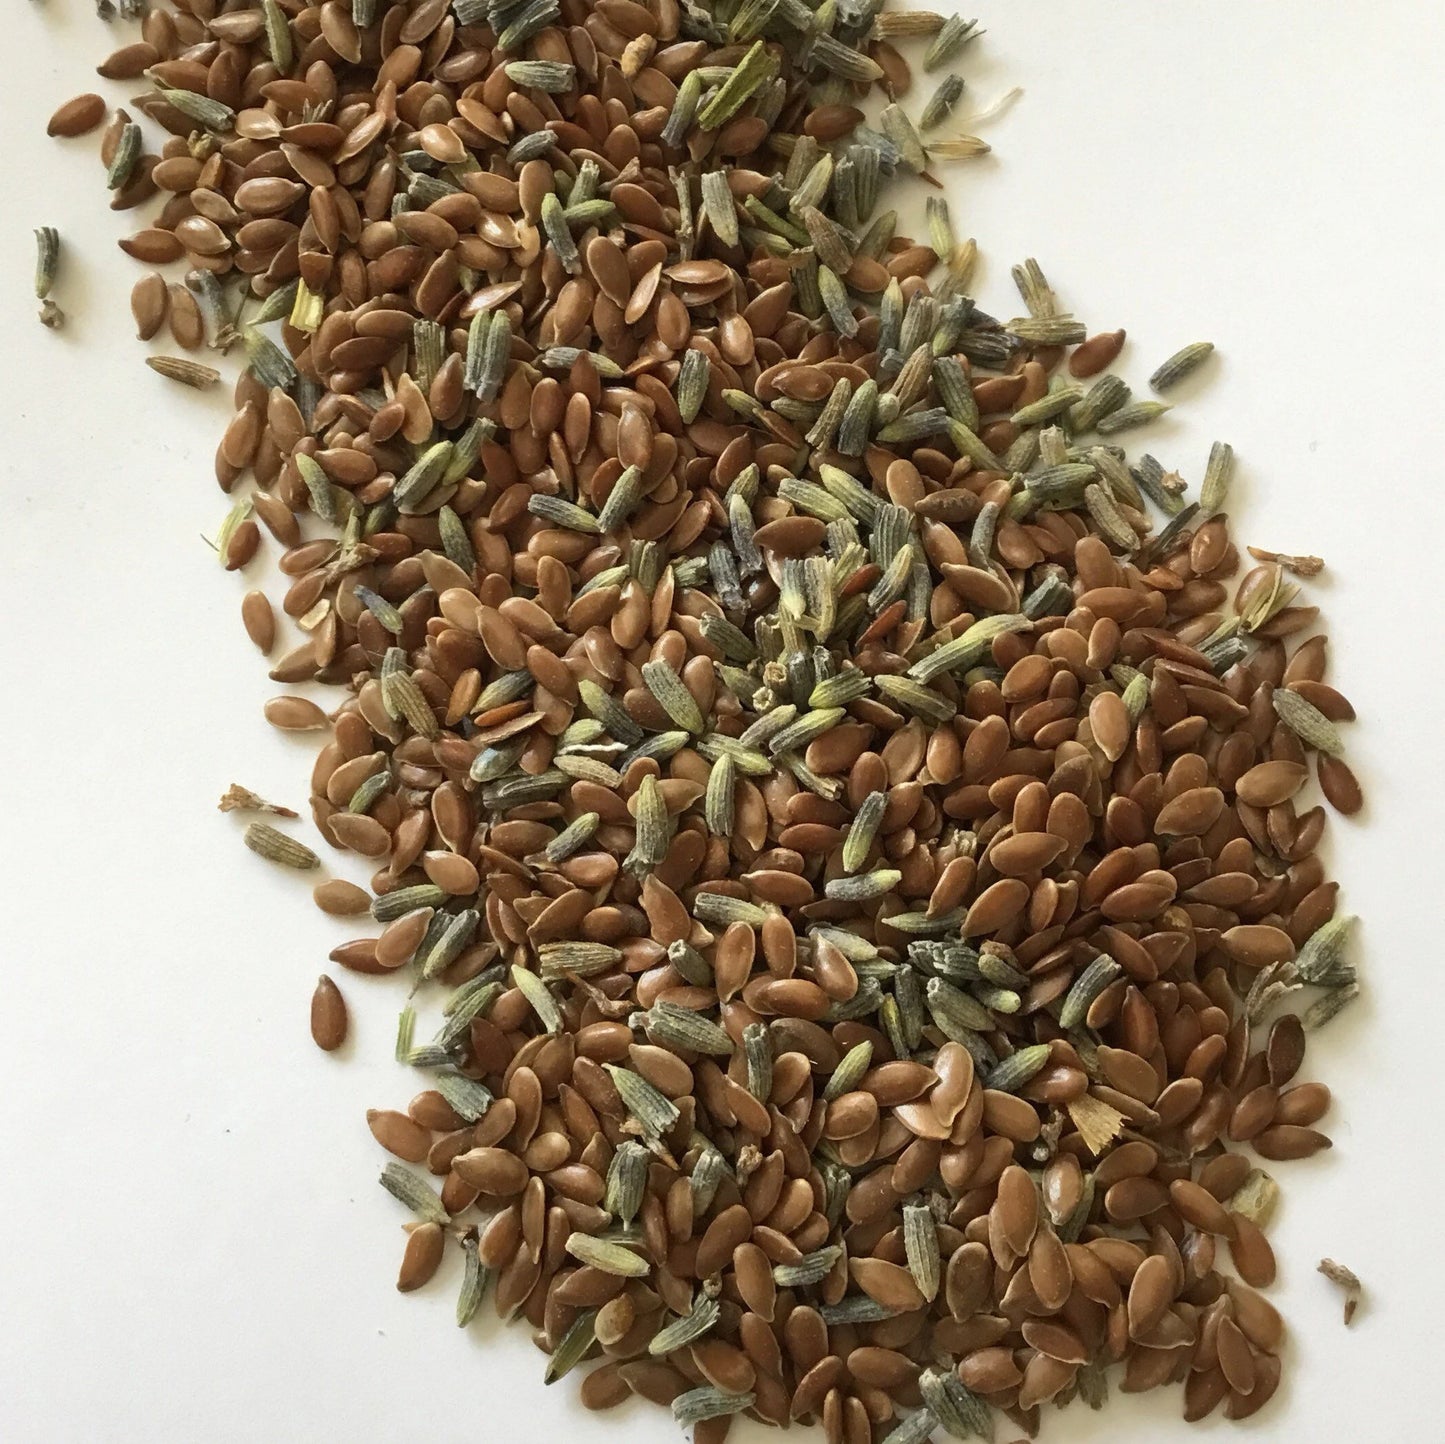 Eye pillow fill of flaxseed and dried lavender buds for weight and comfort